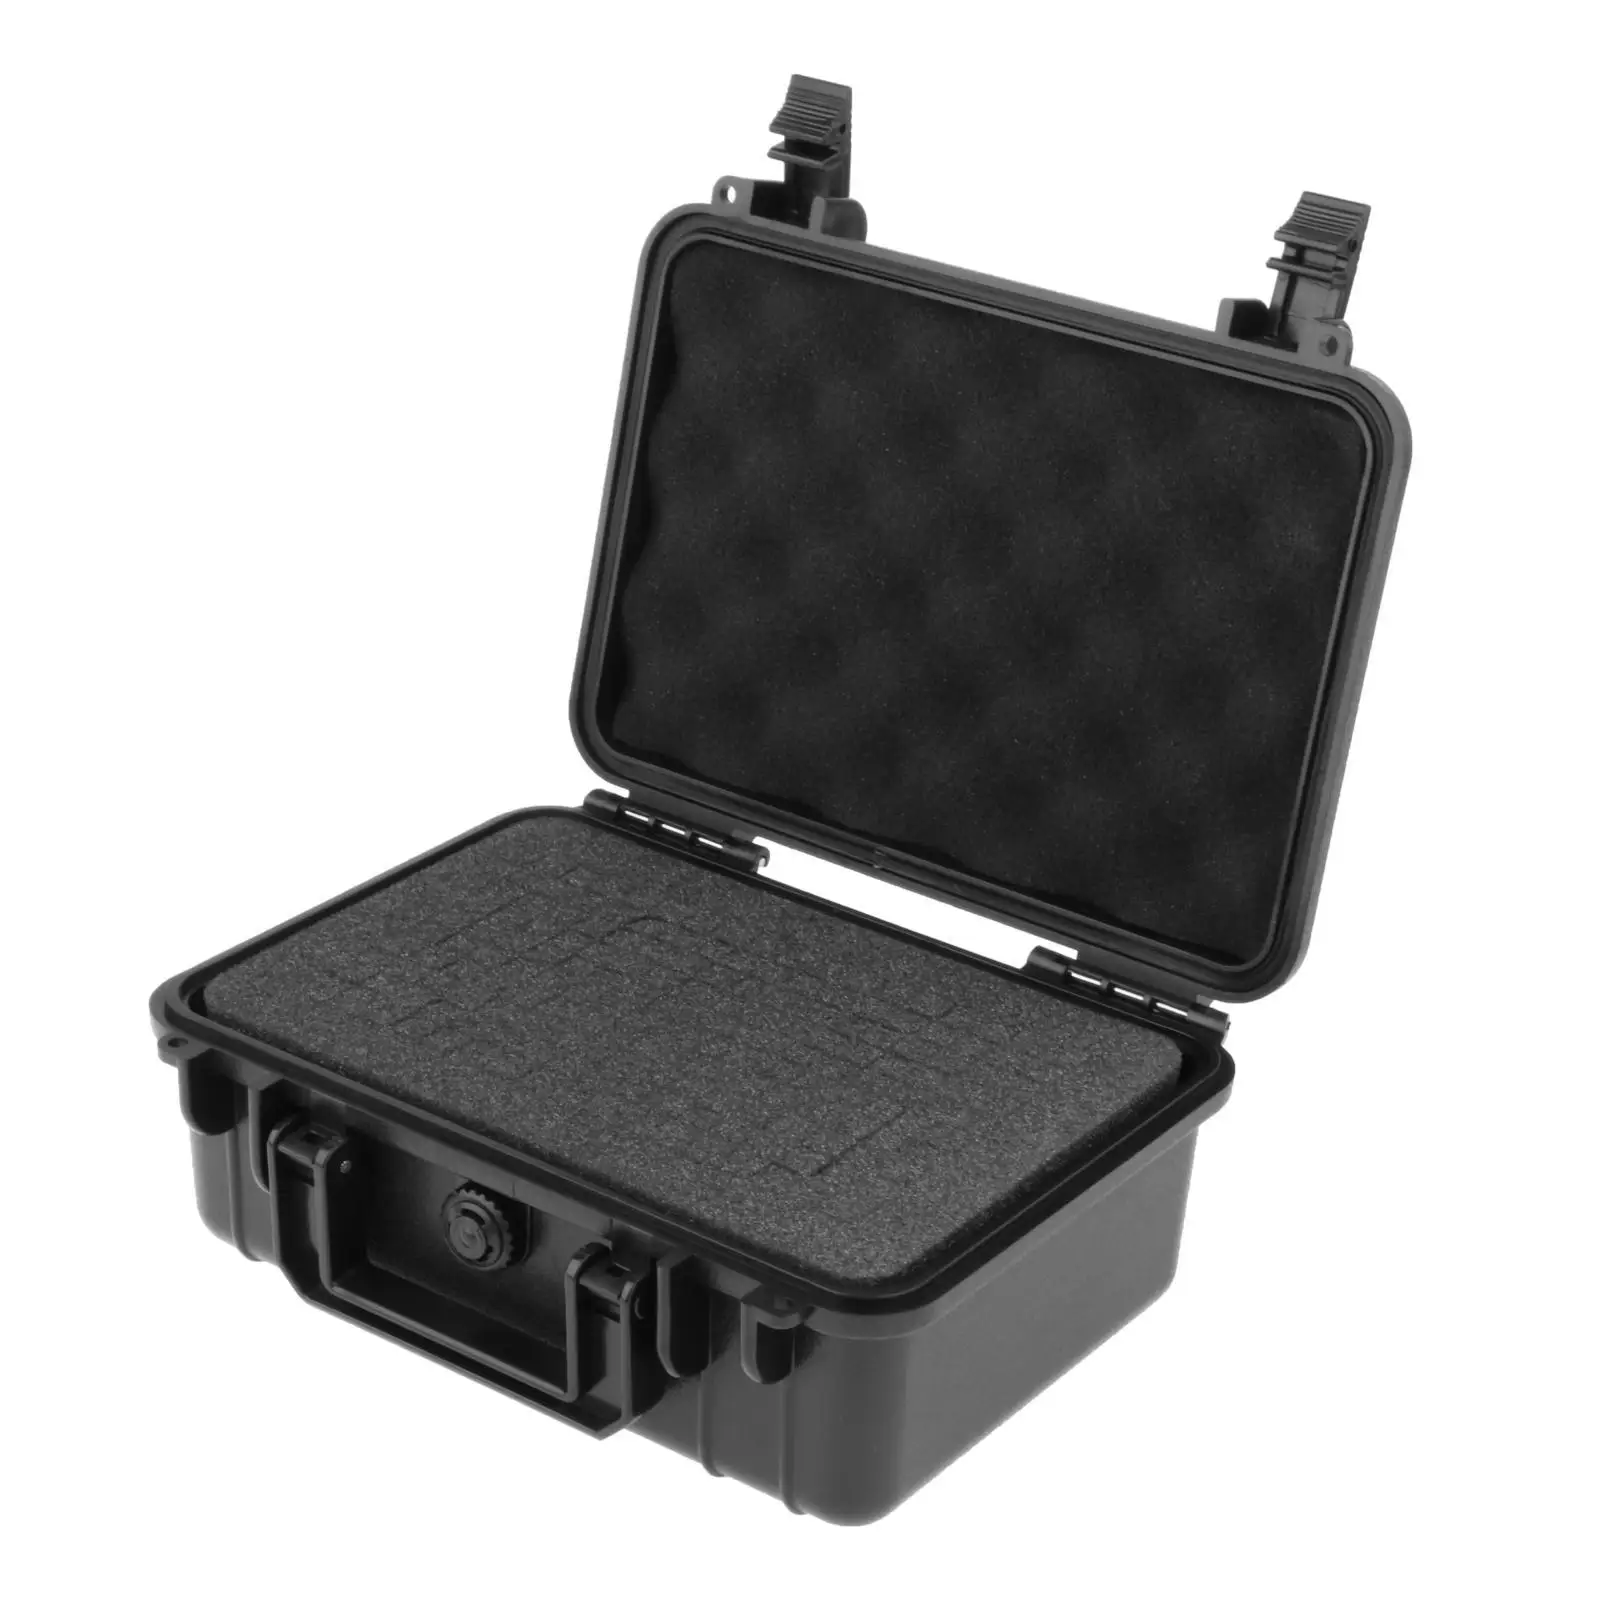 Portable Tool Case Shockproof Tool Organizer Carrying Case for Hand Tools